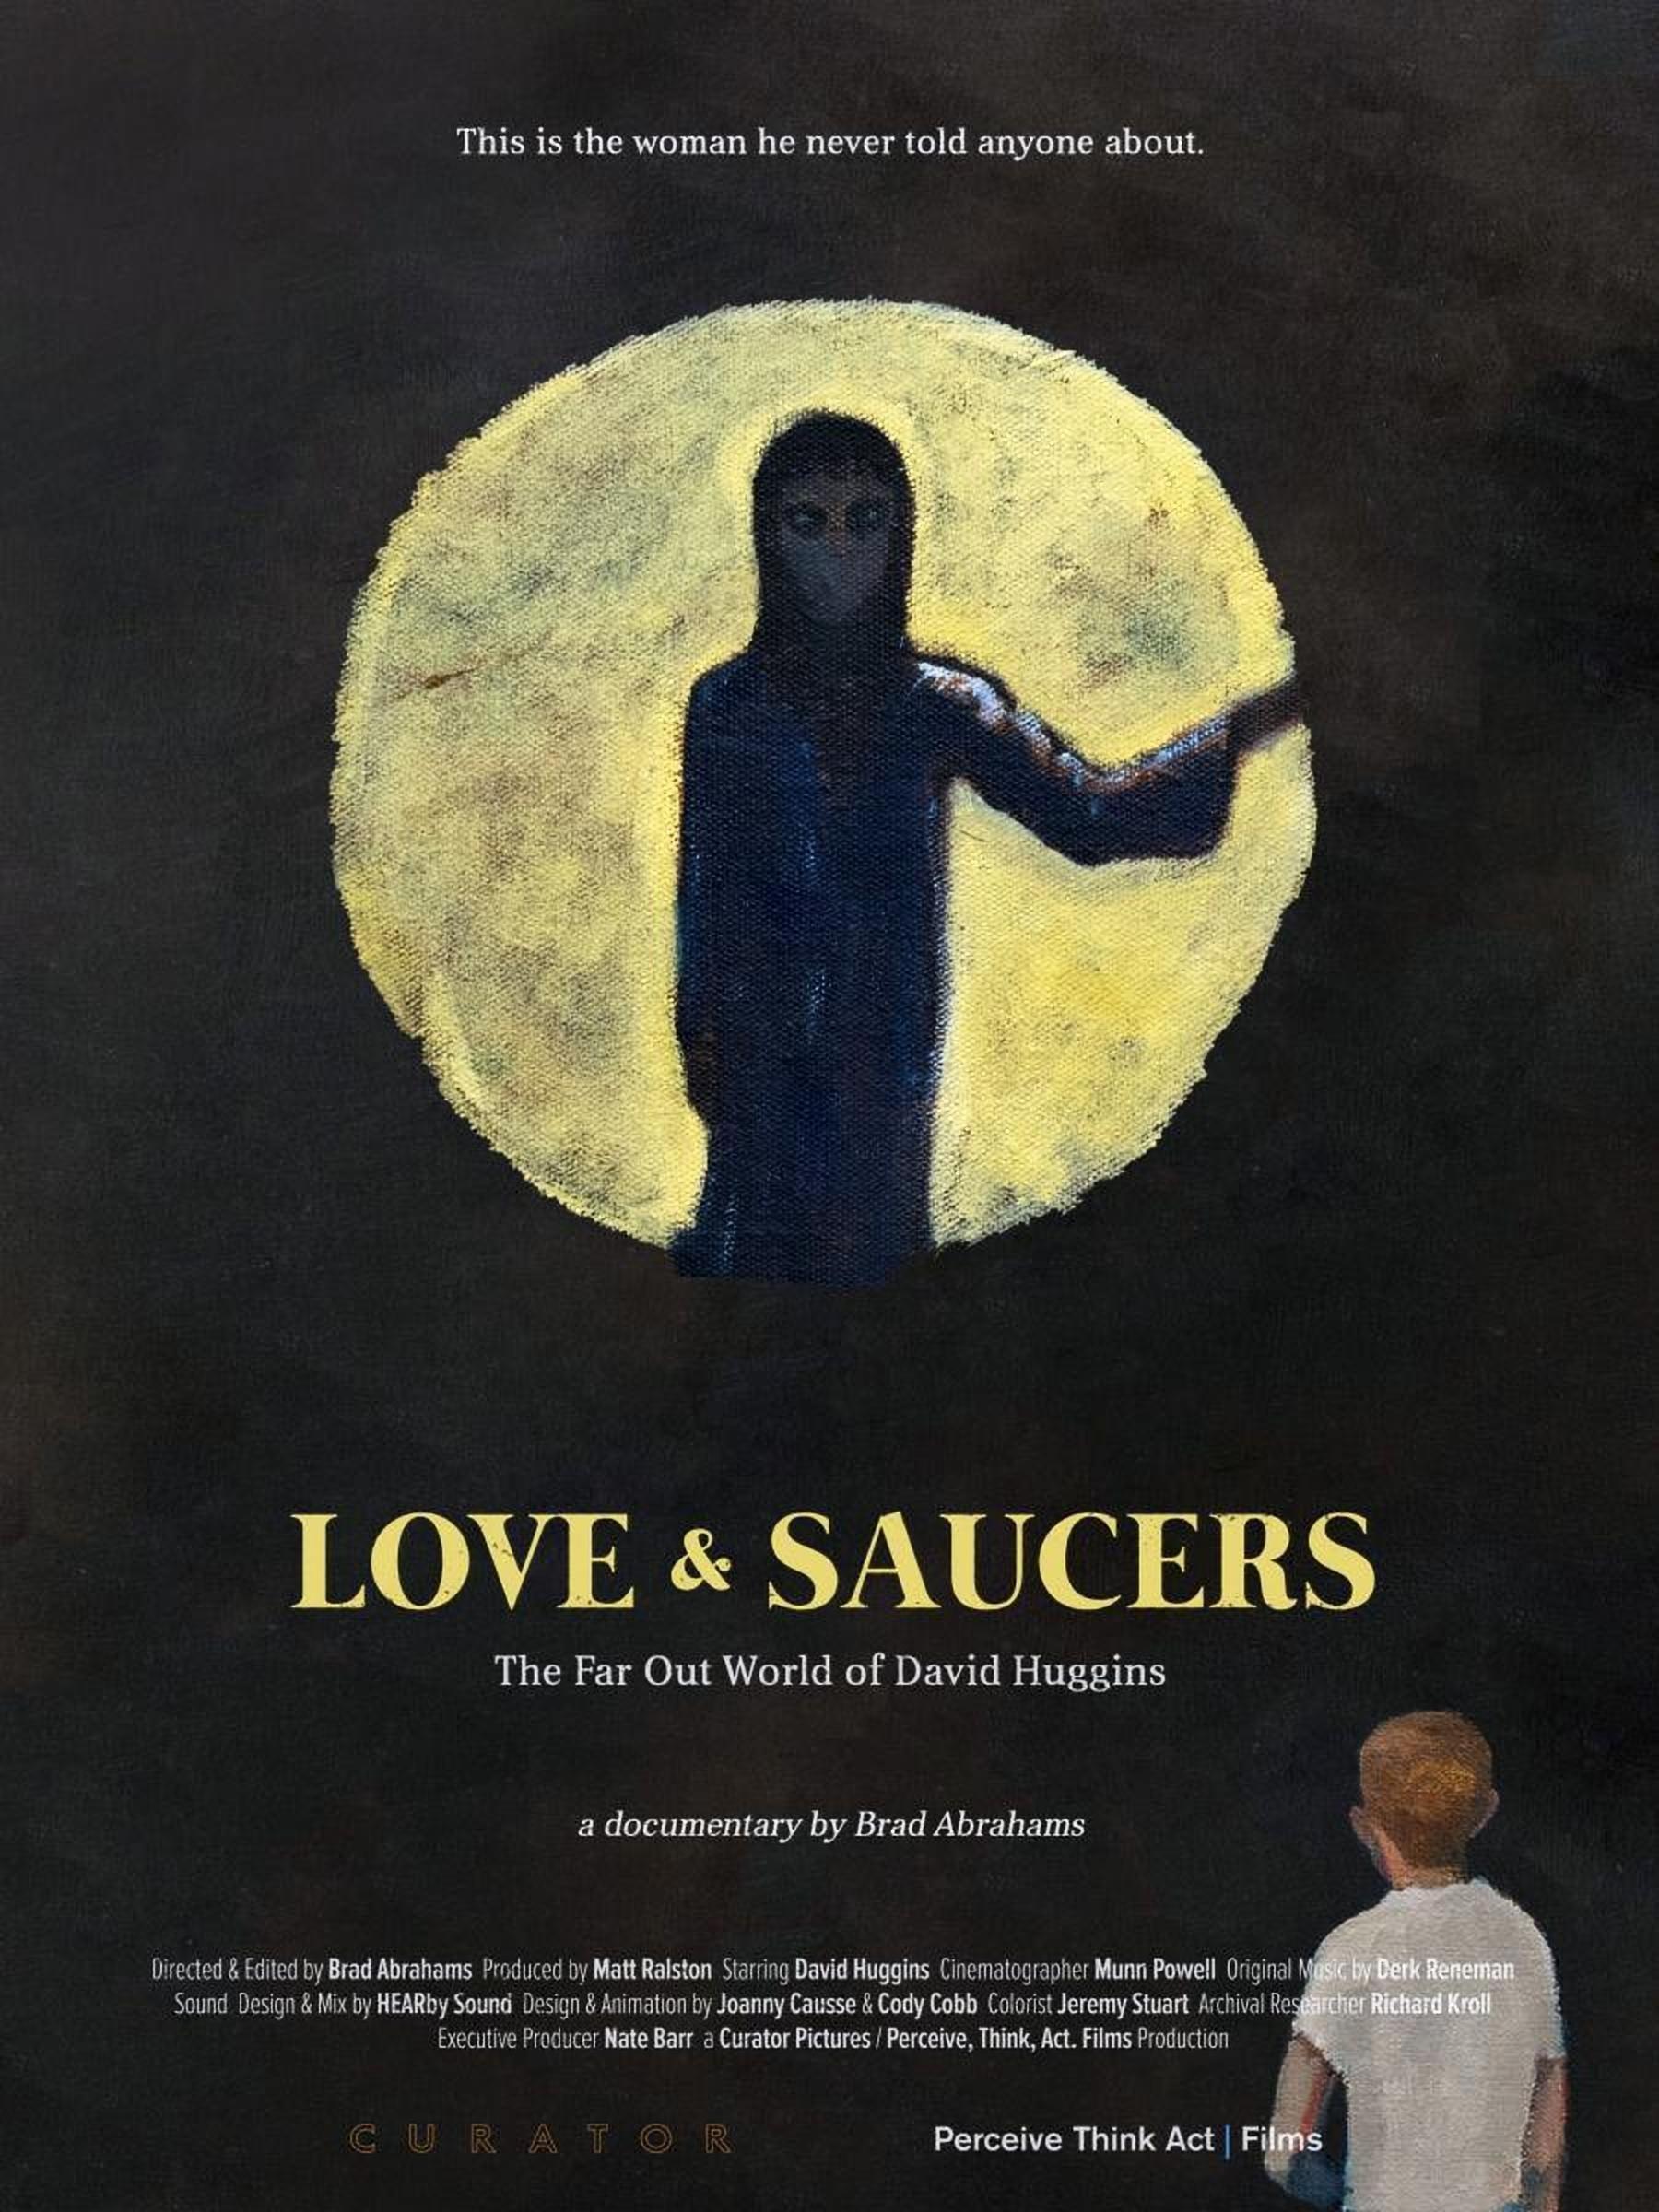 Love & Saucers poster